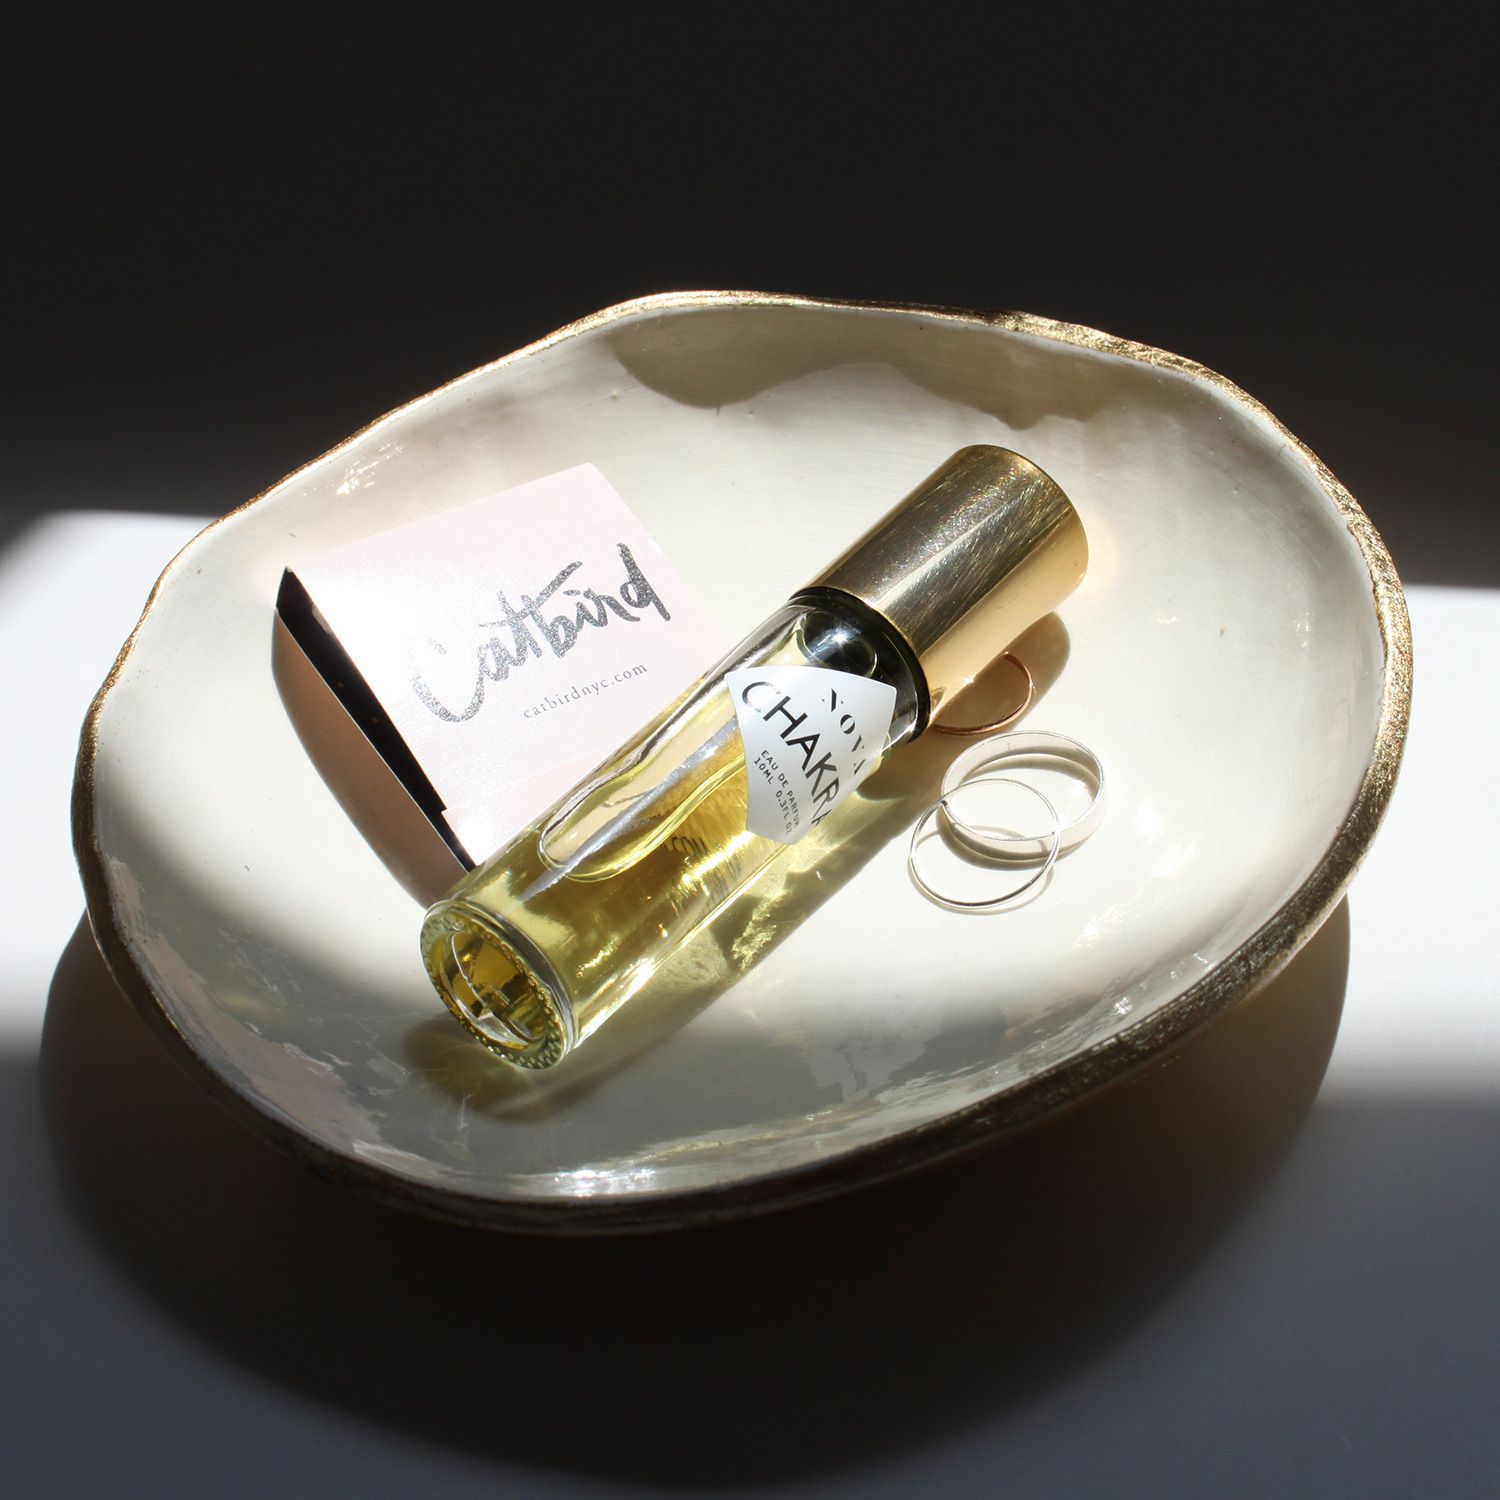 3 Seductive, Indie Perfume Houses To Know If You Love Niche Fragrance